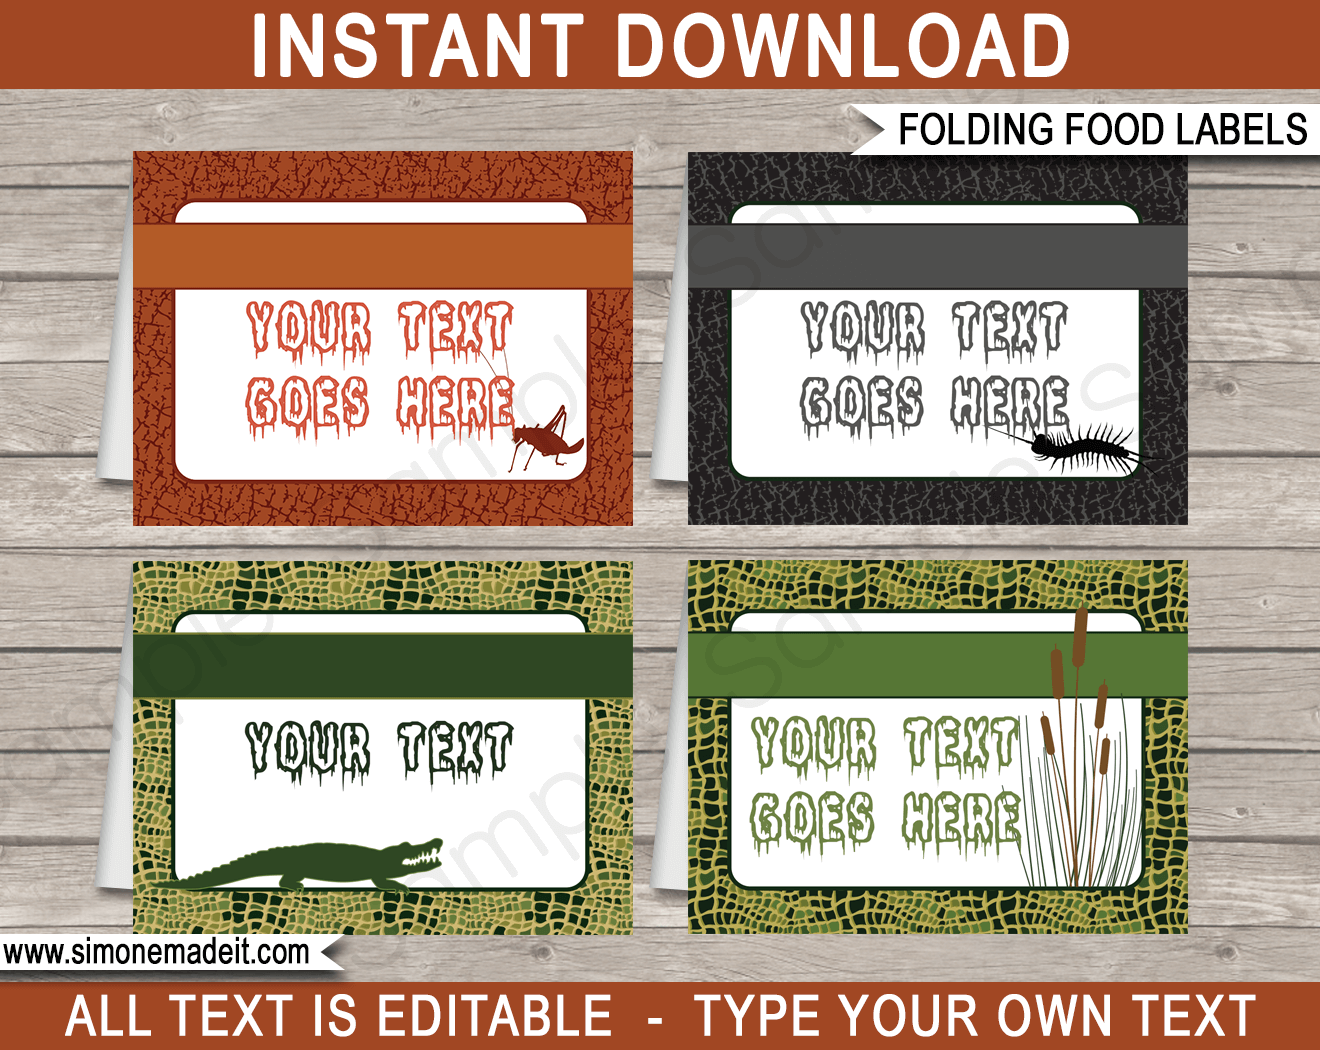 Swamp Party Food Labels | Food Buffet Tags | Place Cards | Birthday Party | Editable DIY Template | $3.00 INSTANT DOWNLOAD via SIMONEmadeit.com